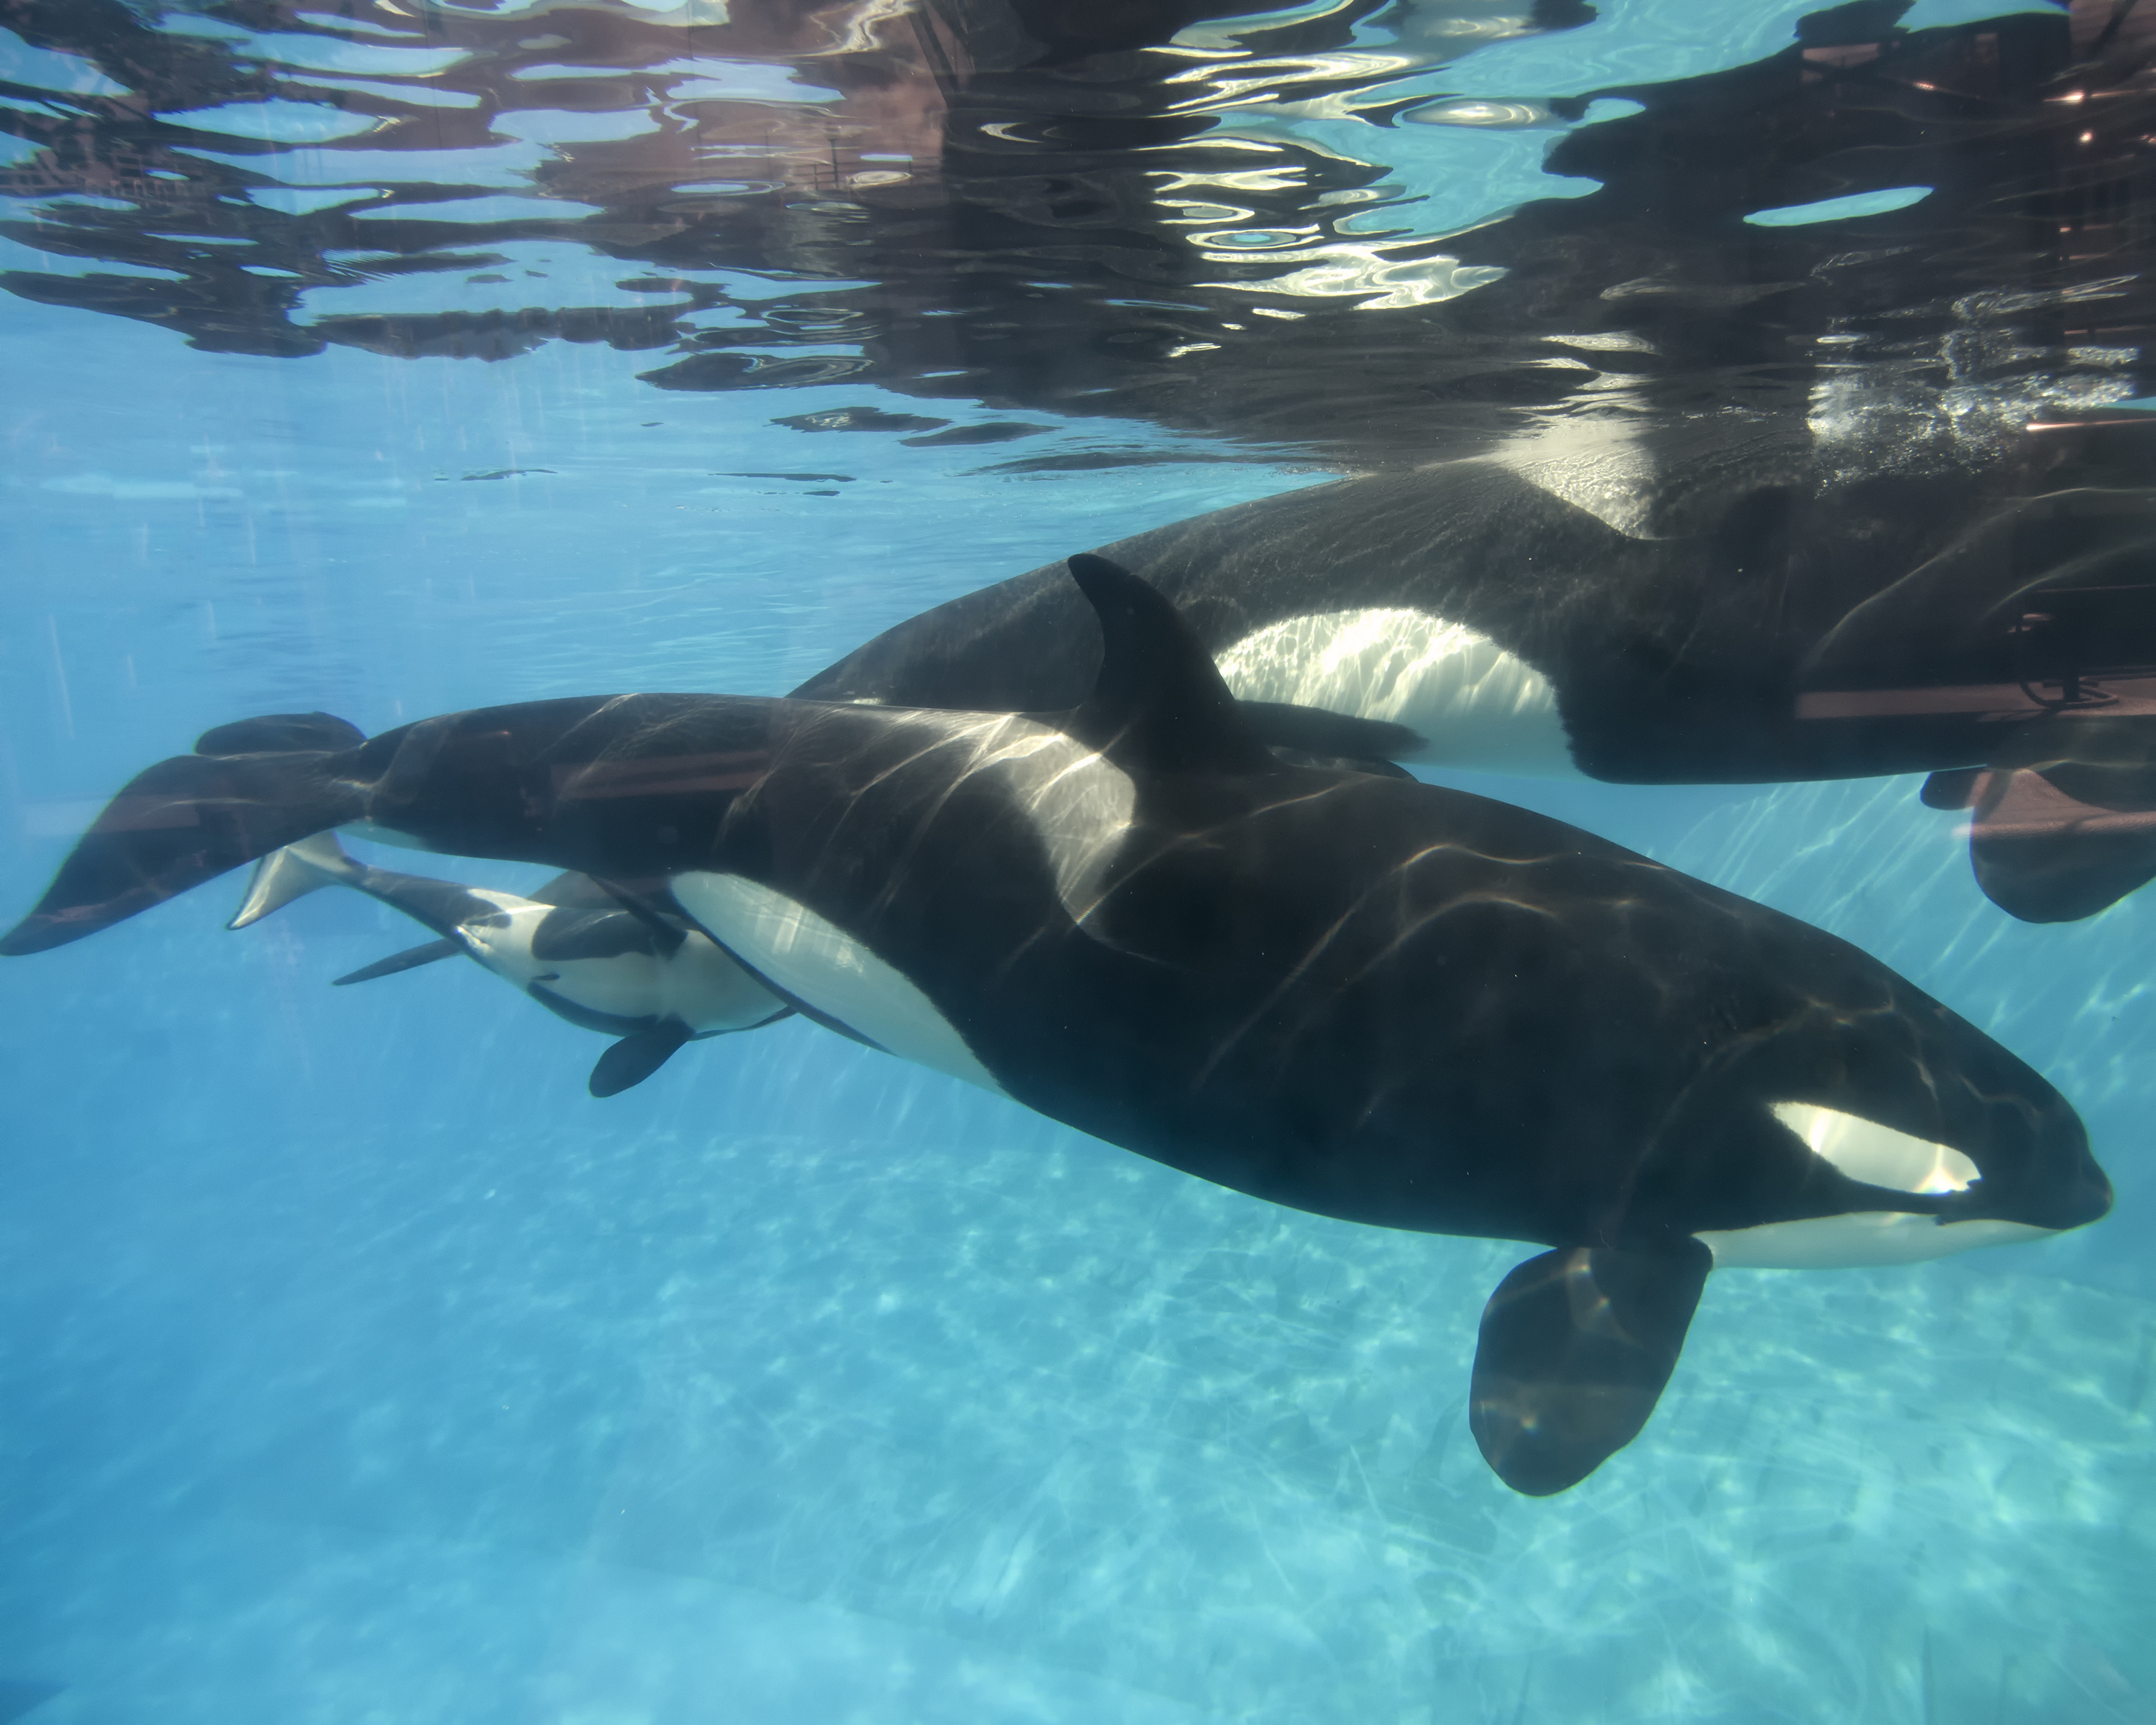 SAN DIEGO, CA - DECEMBER 02: In this handout photo provided by SeaWorld San Diego, a baby killer whale calf nurses from its mother, Kalia, at SeaWorld San Diego's Shamu Stadium December 4, 2014 in San Diego, California. Kalia's mother, Kasatka, swims beside her, as she did during Kalia's labor and delivery. Kalia gave birth to the calf at 12:34 p.m. on Tuesday, Dec. 2, under the watchful eyes of SeaWorld's zoological team. SeaWorld's zoological staff is monitoring the mom and calf round the clock, taking note of nursing, bonding and other developmental milestones.